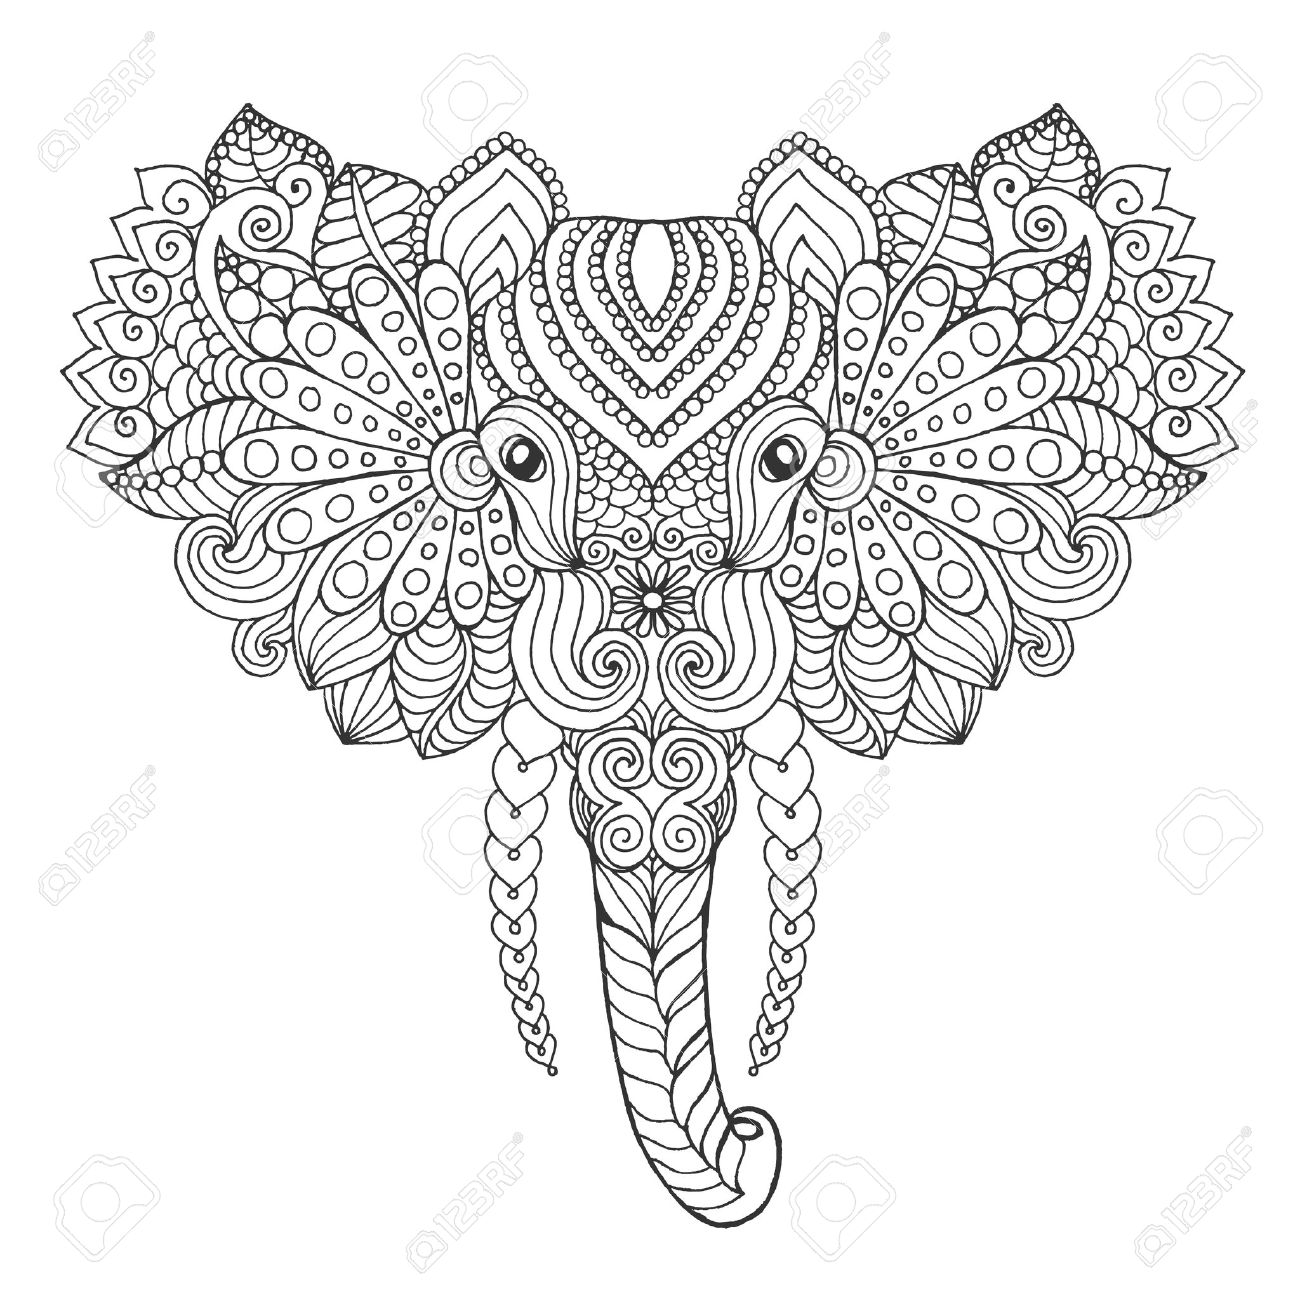 Elephant Head Coloring Pages For Adults.